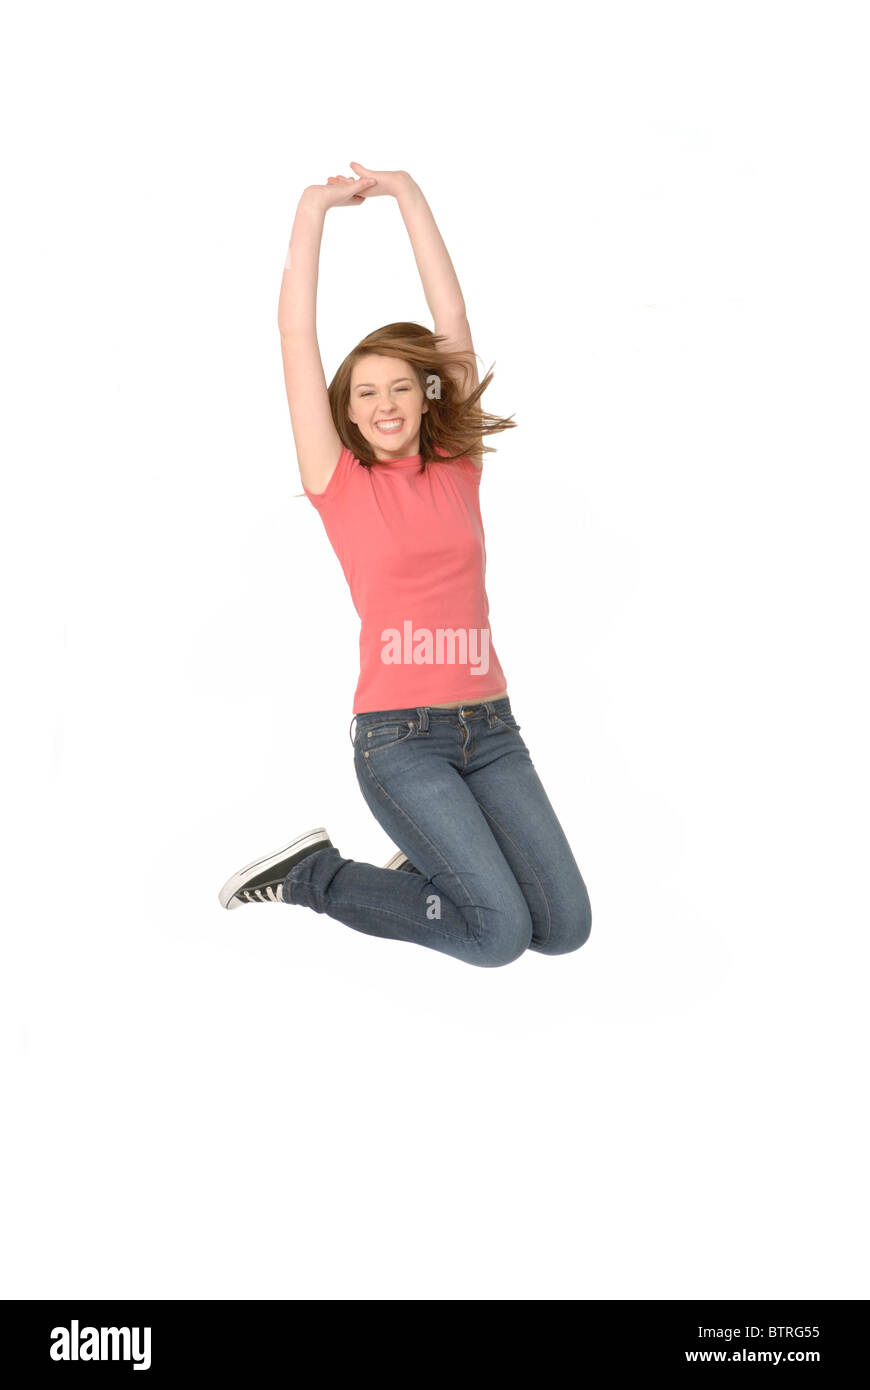 Happy teenage girl jumping in the air, on white background. Stock Photo